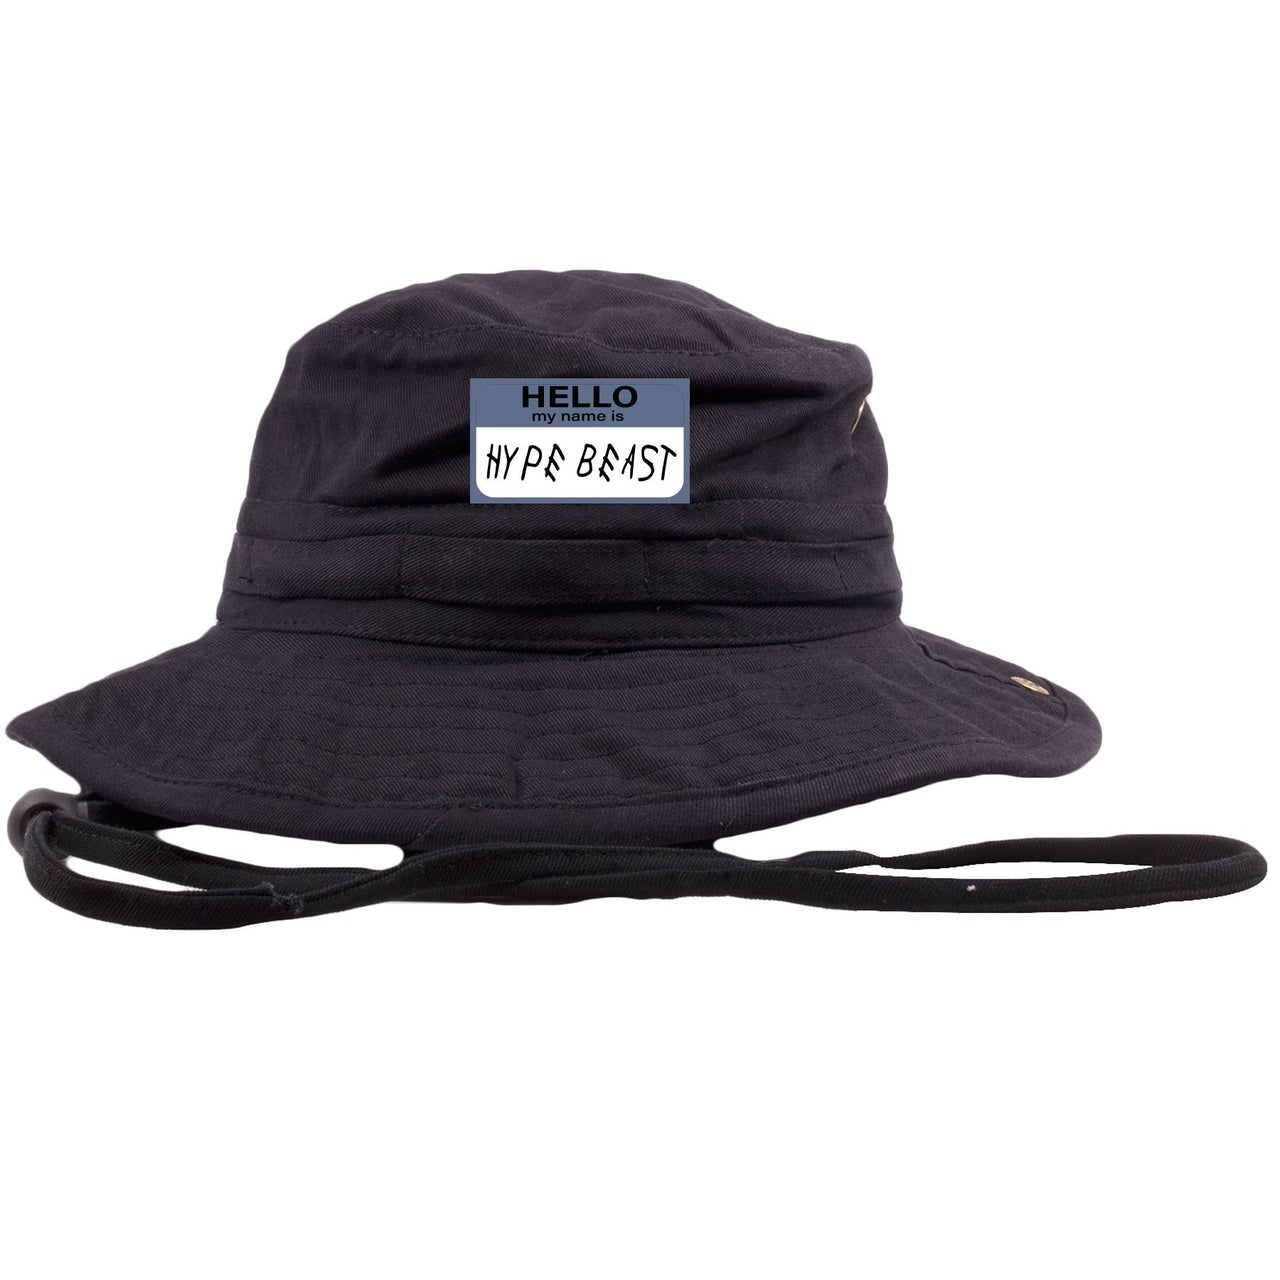 Cap and Gown 13s Bucket Hat | Hello My Name is Hype Beast Woe Style, Black